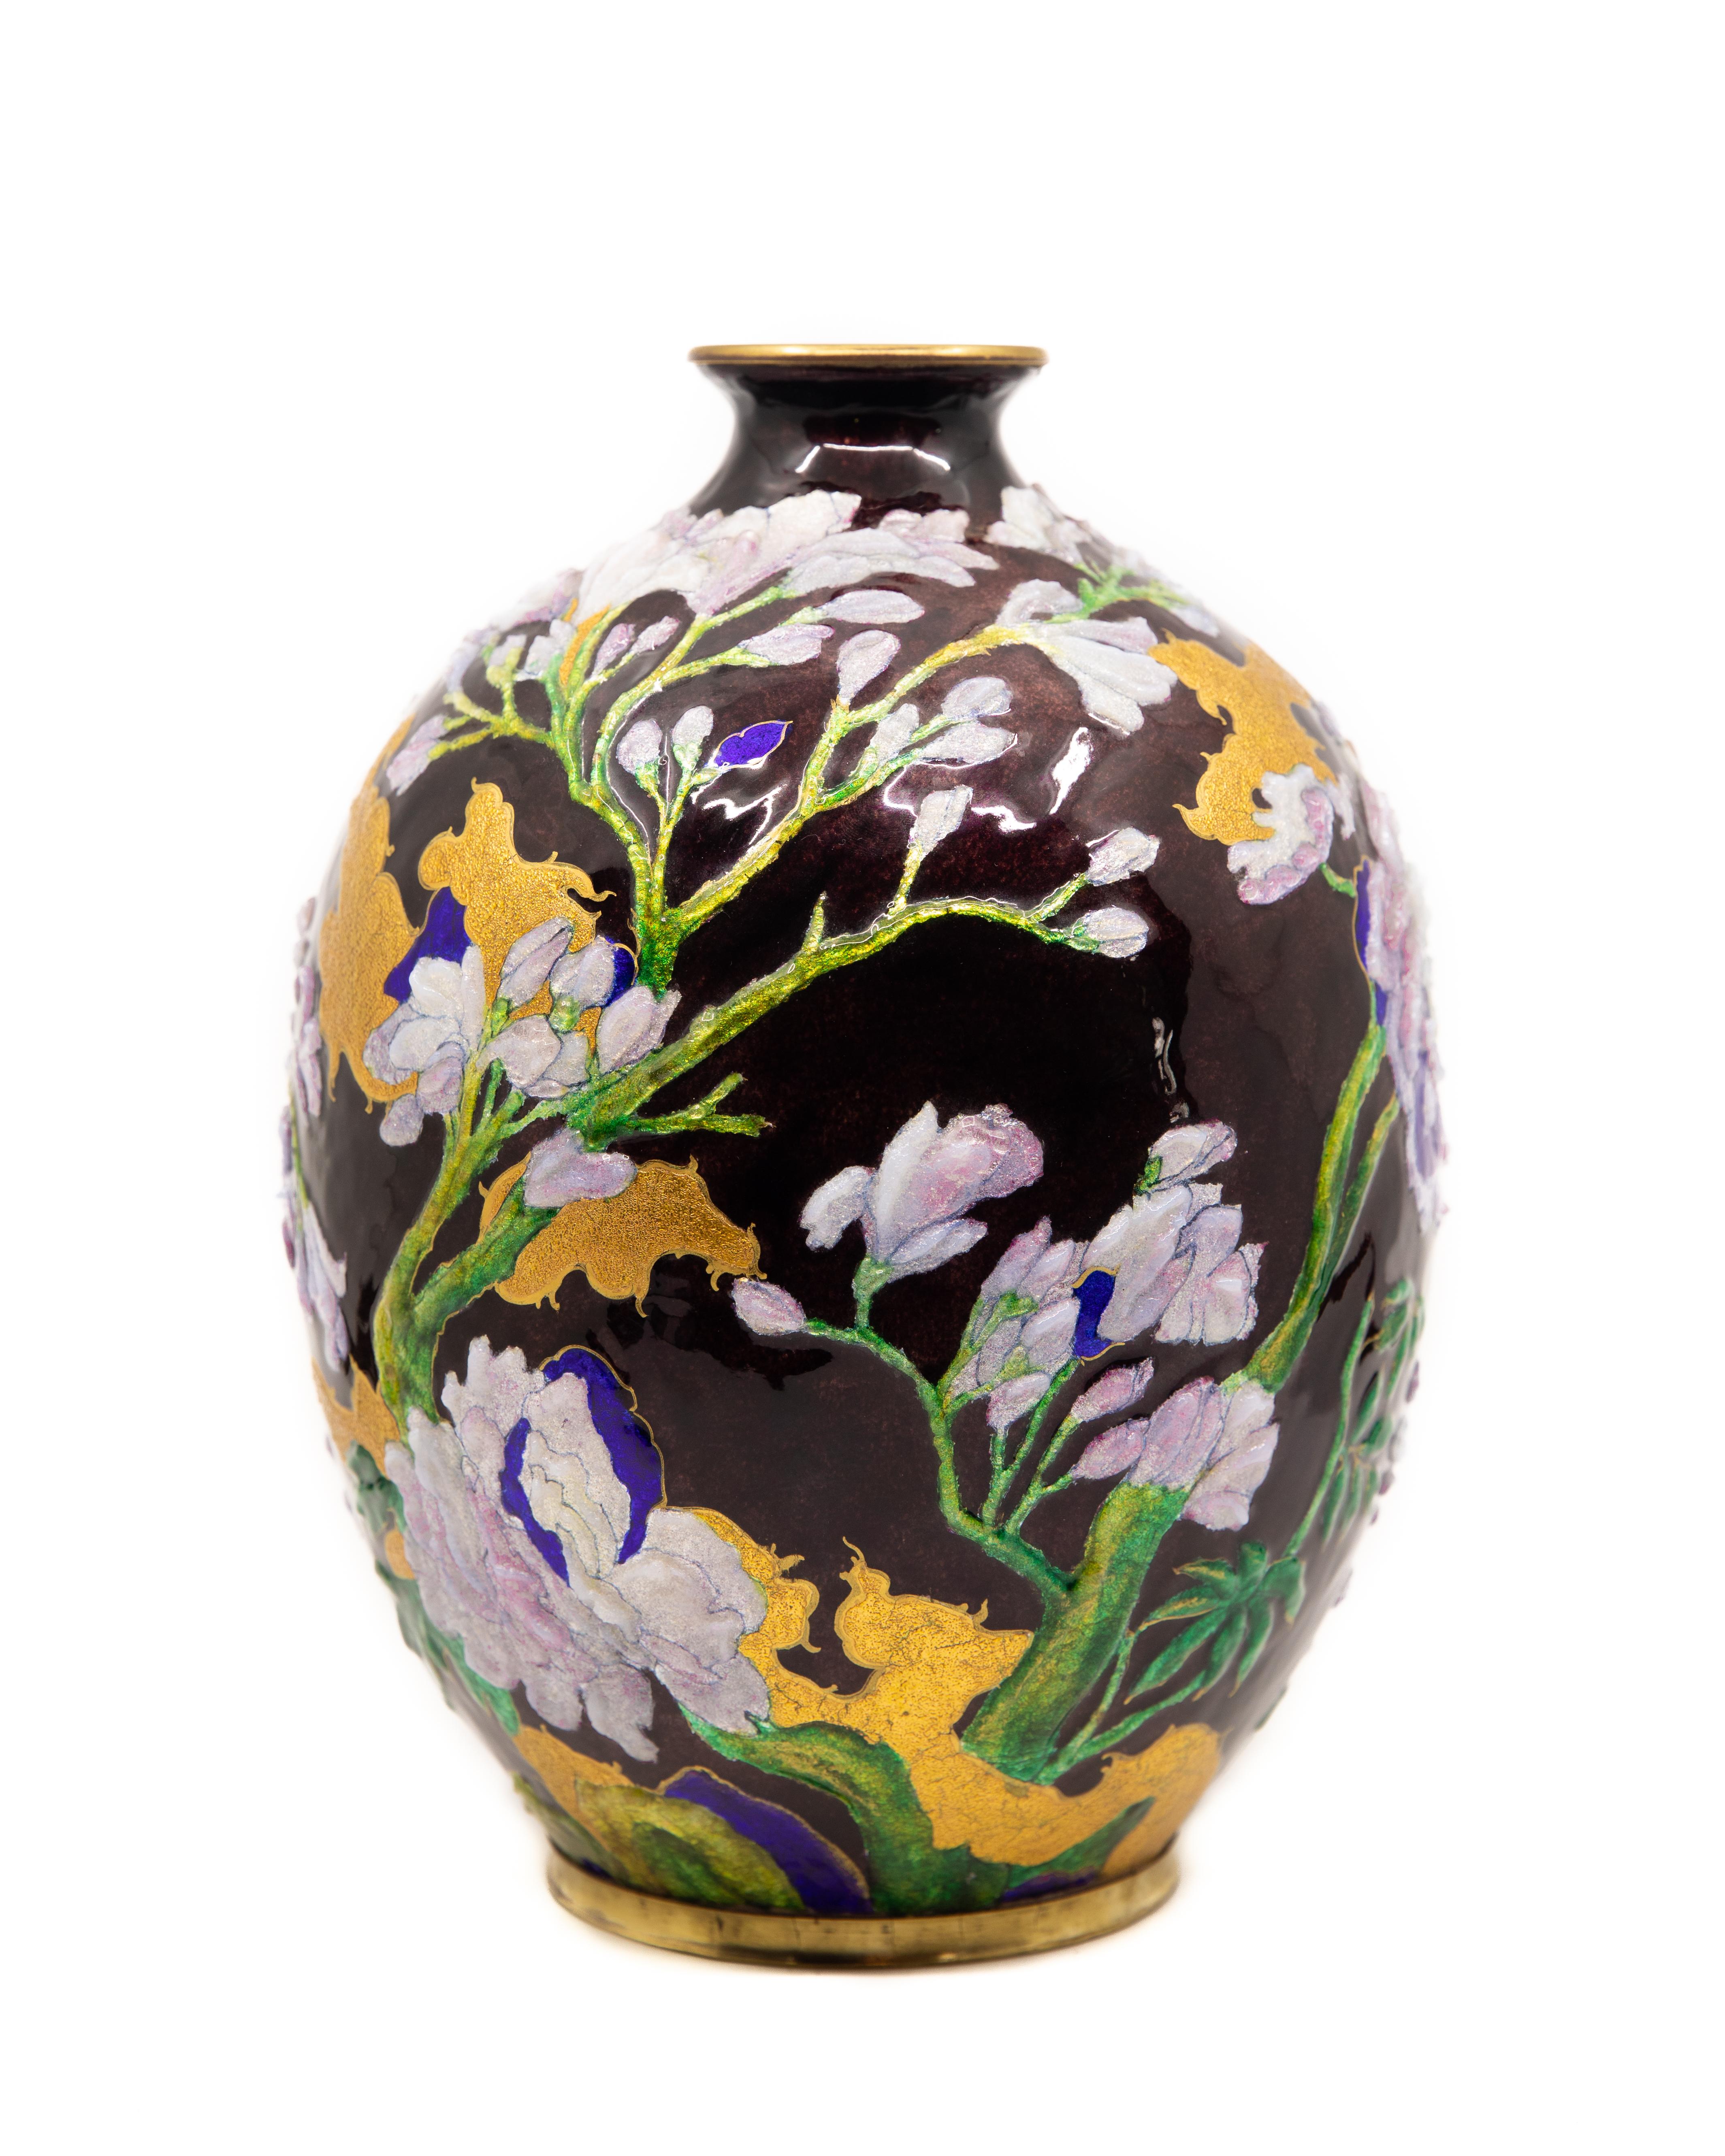 Offered is a beautiful Art Nouveau Camille Fauré for Limoges, bas-relief raised three dimensional enameled floral motif with gold enamel accents on a plum ground copper vase, signed 